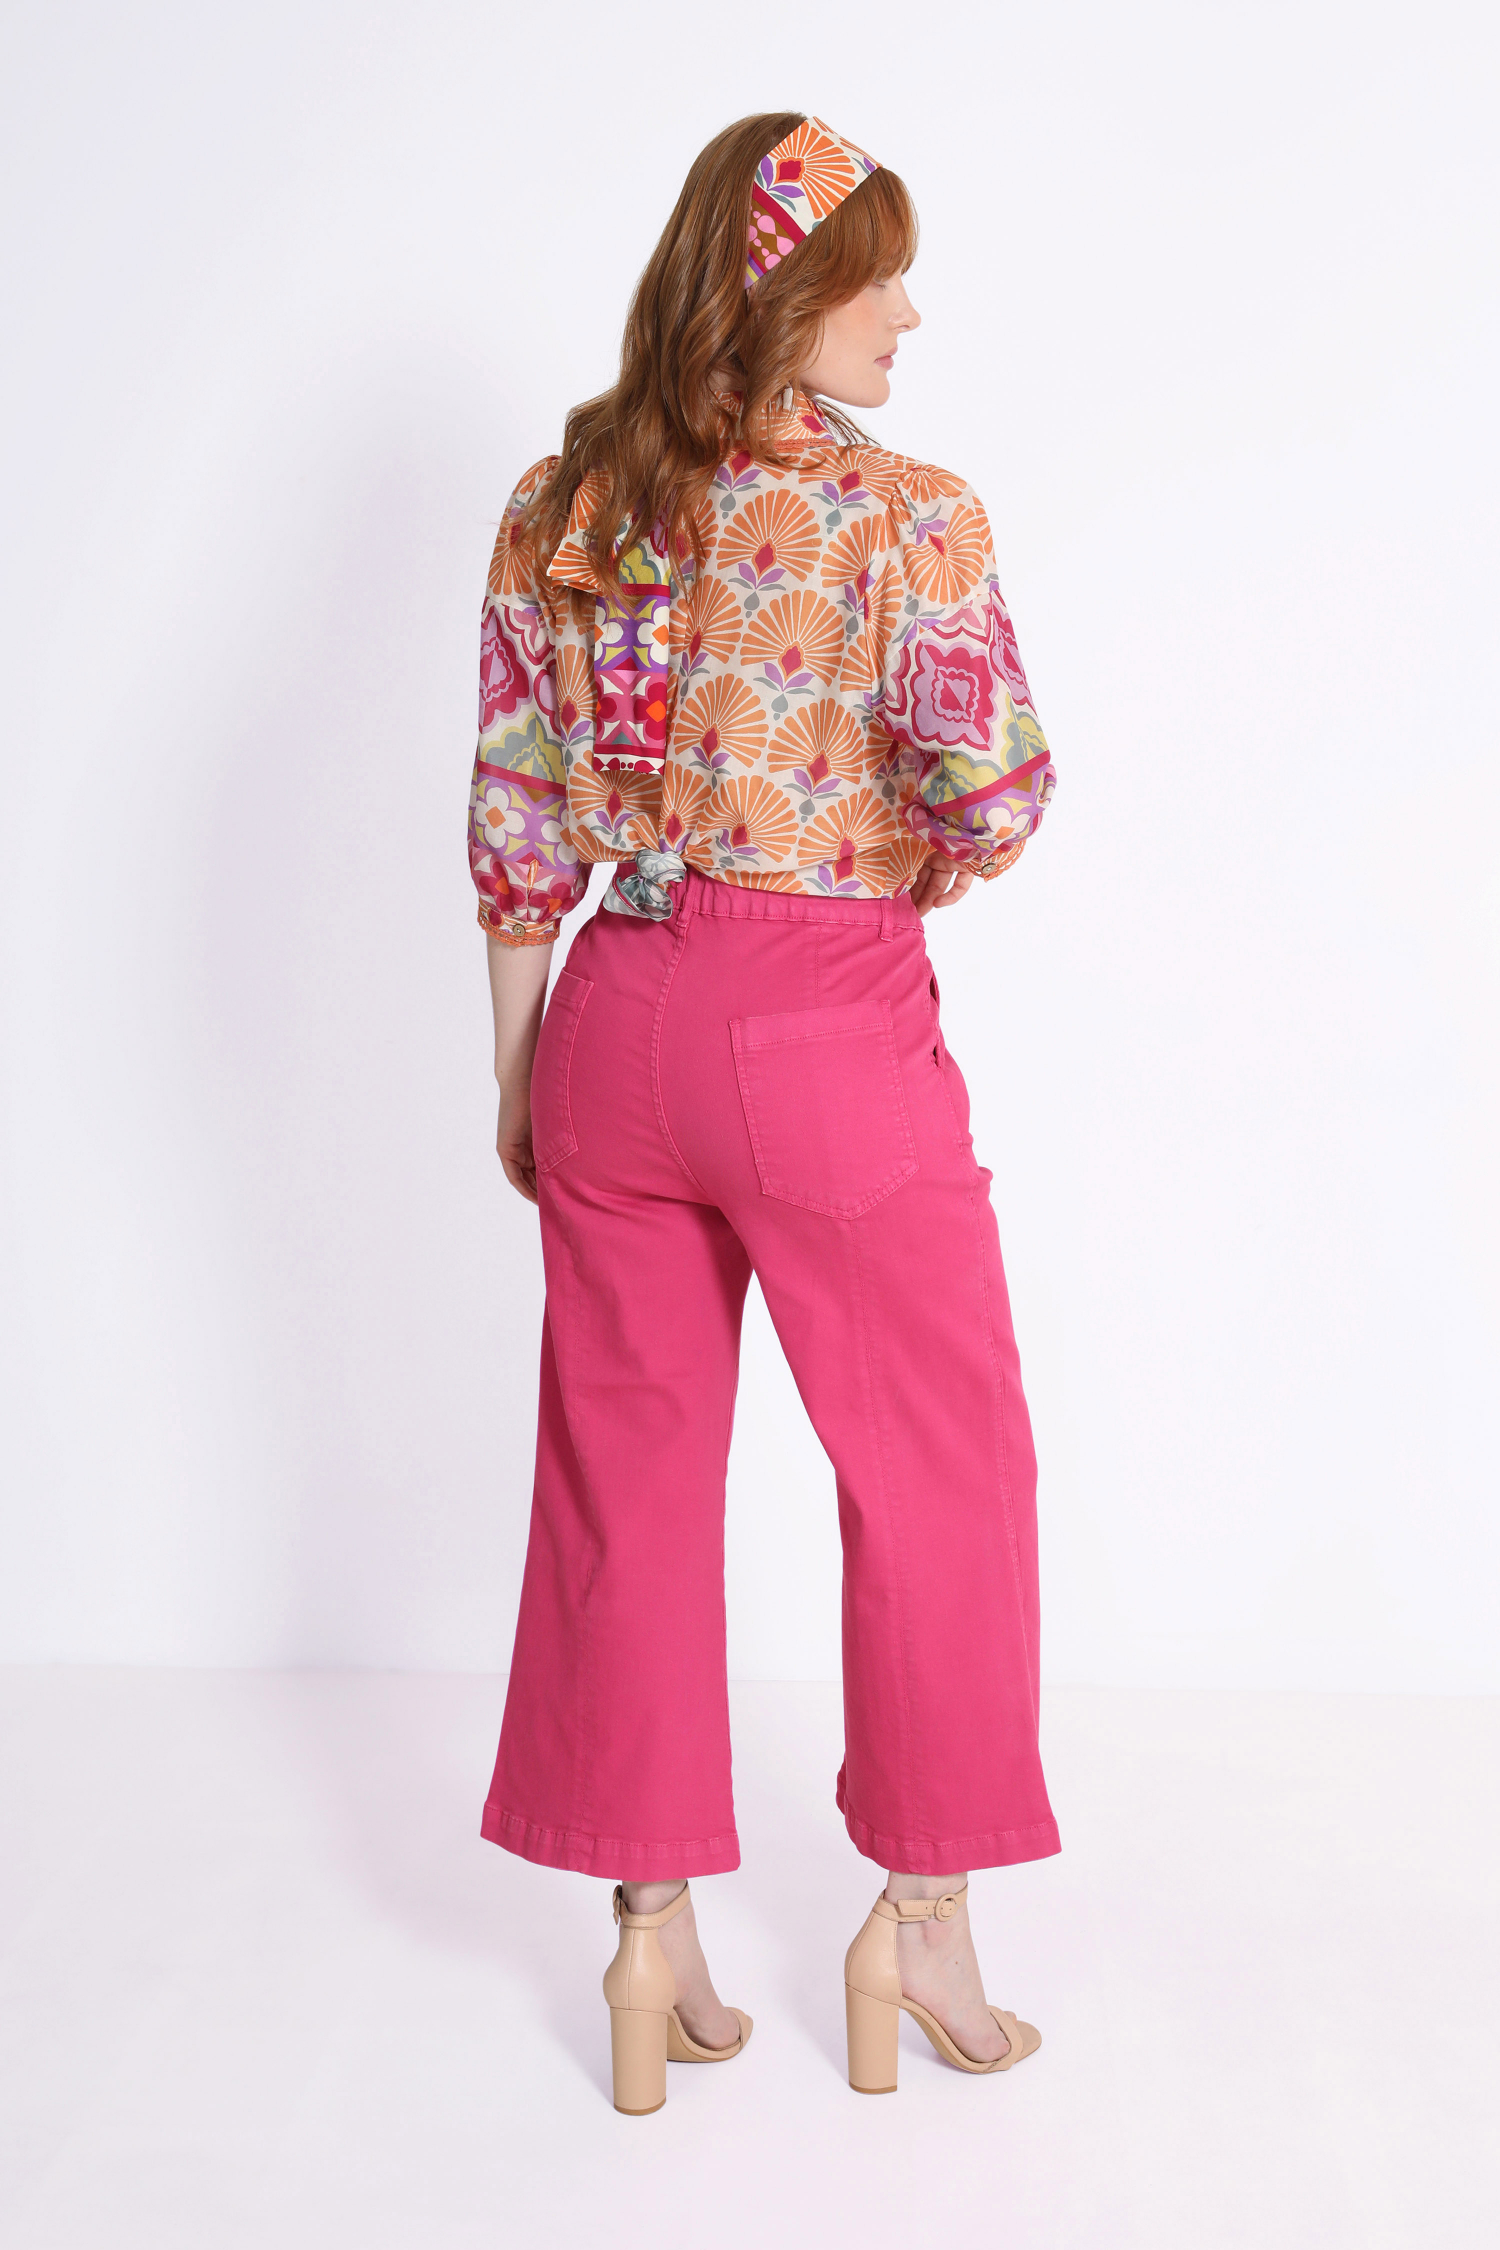 Tie n dye colored jeans with fancy placket and buttons